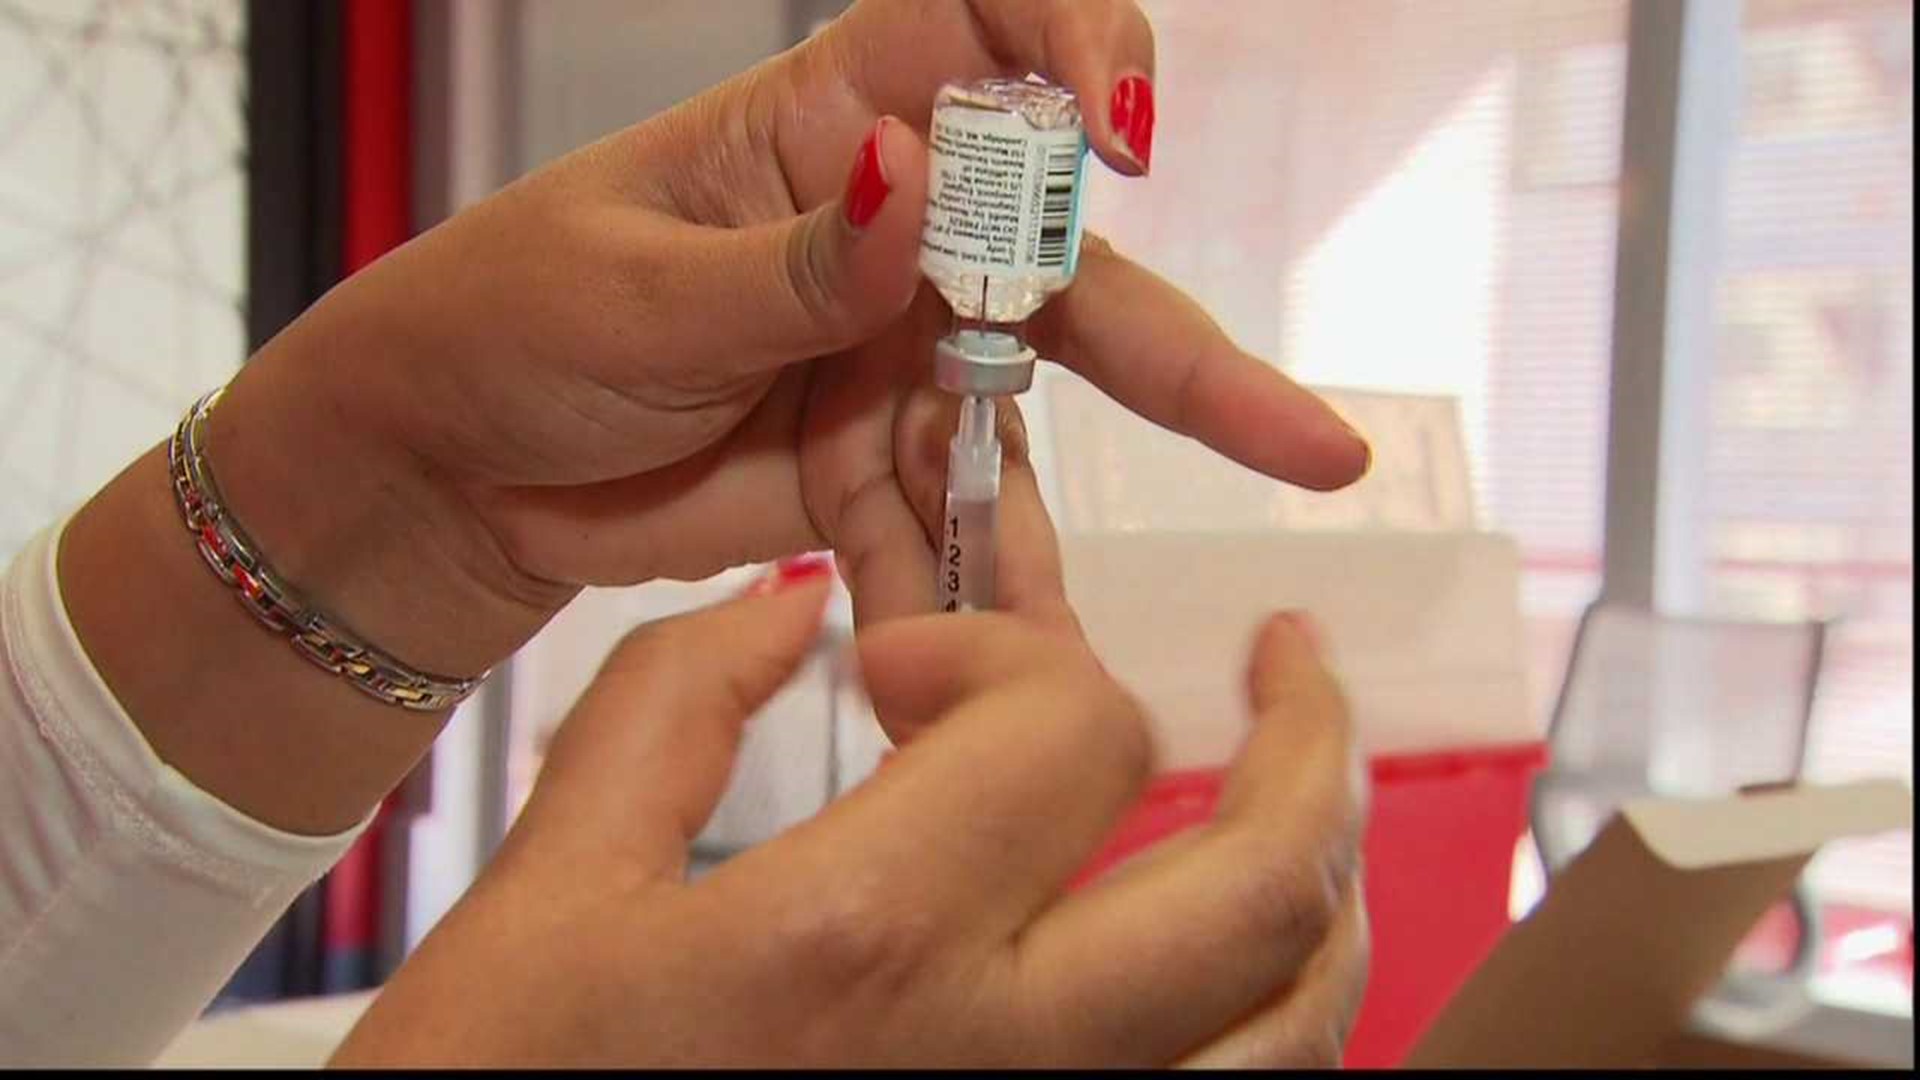 As COVID-19 cases continue to rise due to the Delta variant and put pressure on hospitals & emergency rooms, doctors are reminding everyone to get a flu shot